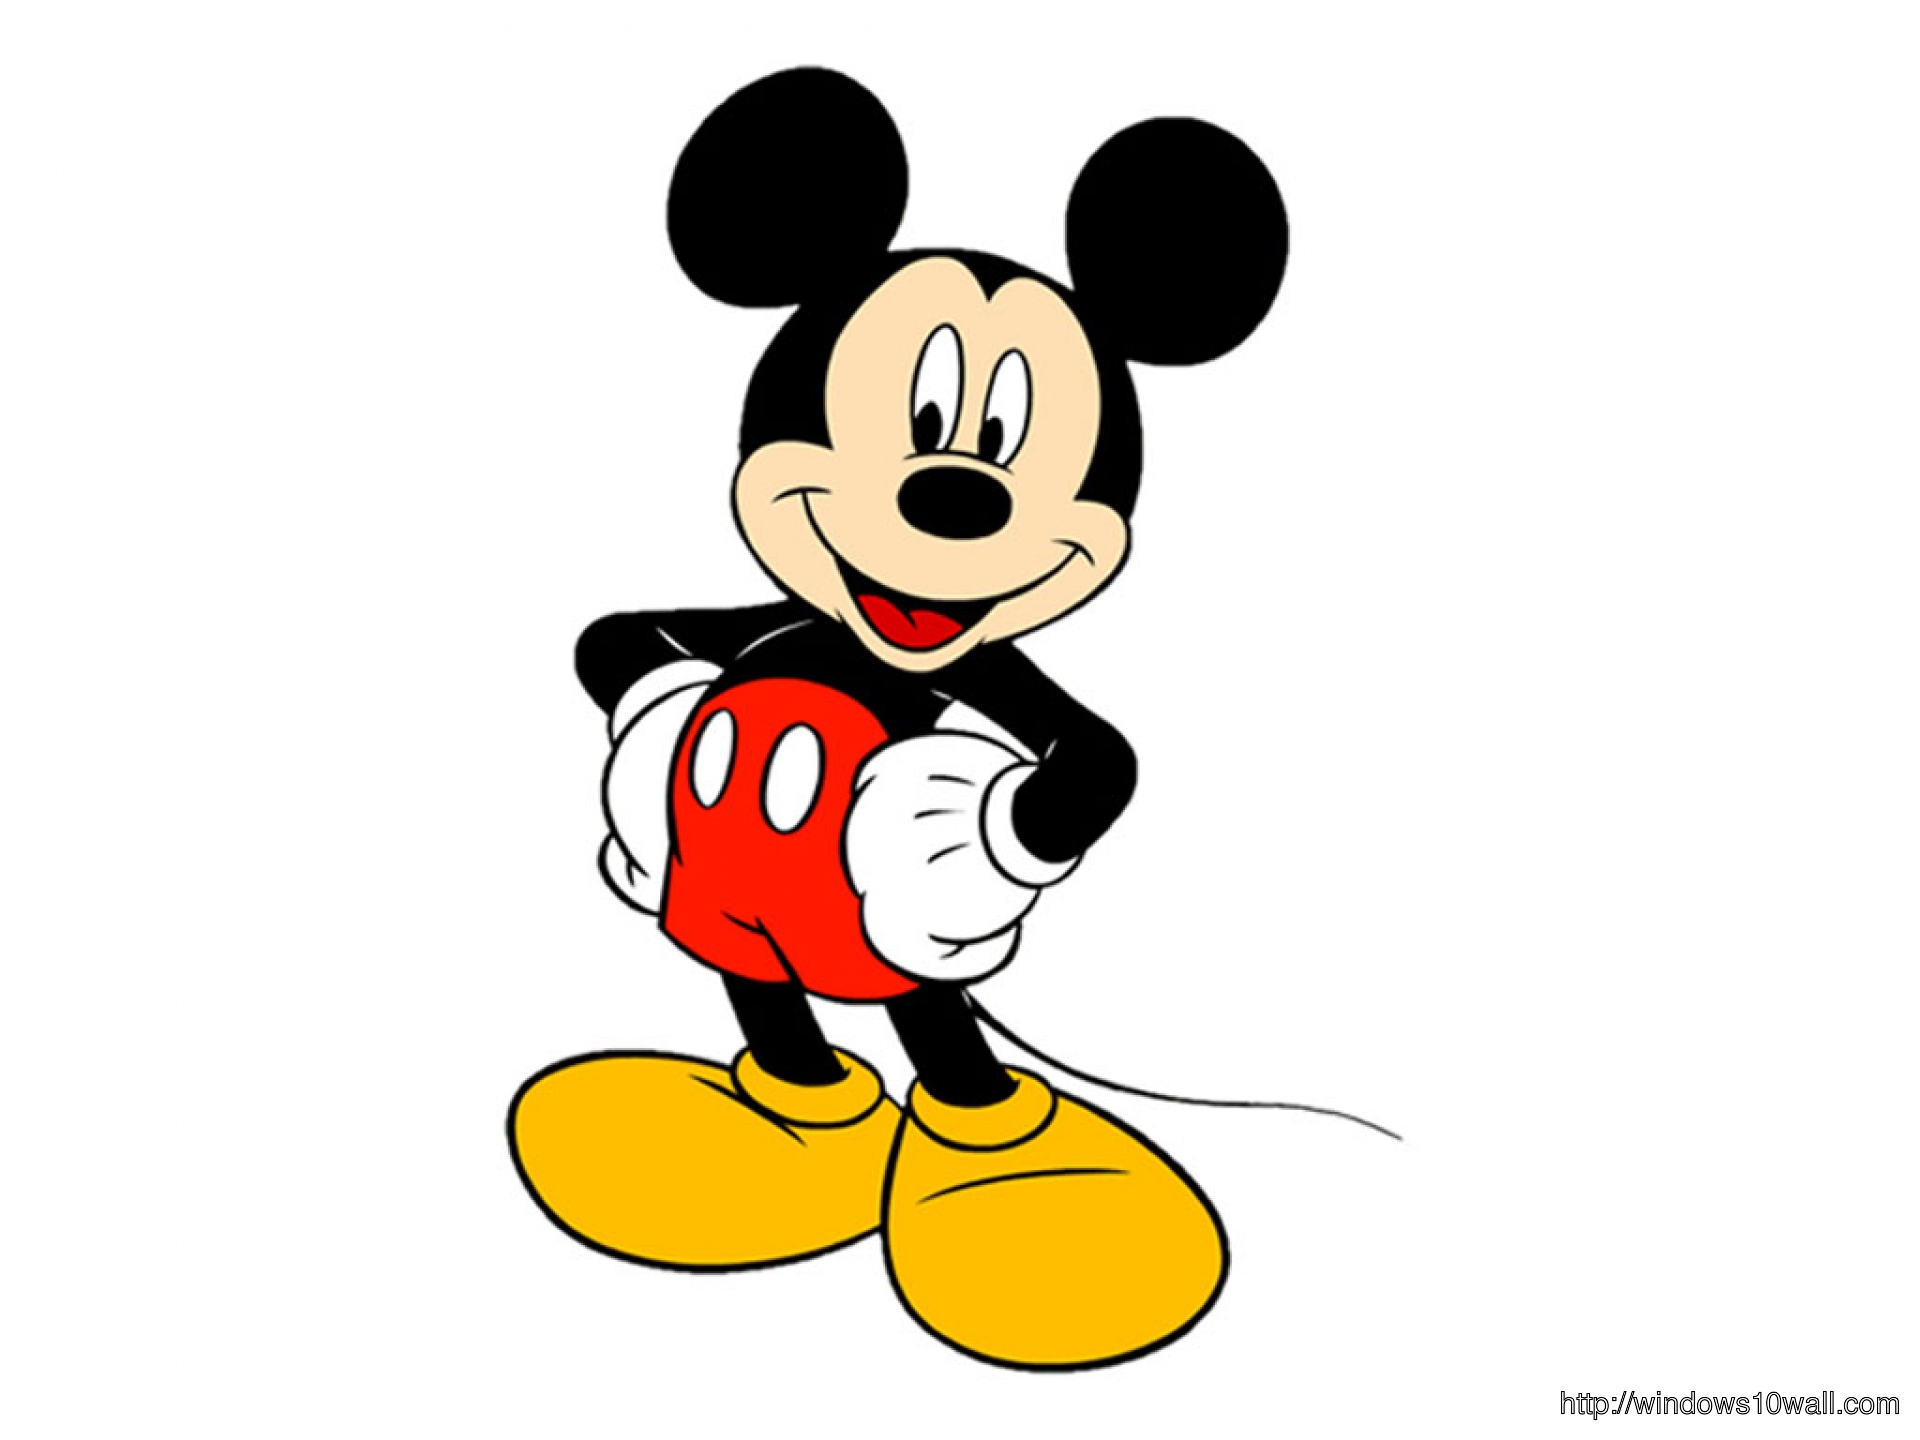 Simple Mickey Mouse Background Wallpaper